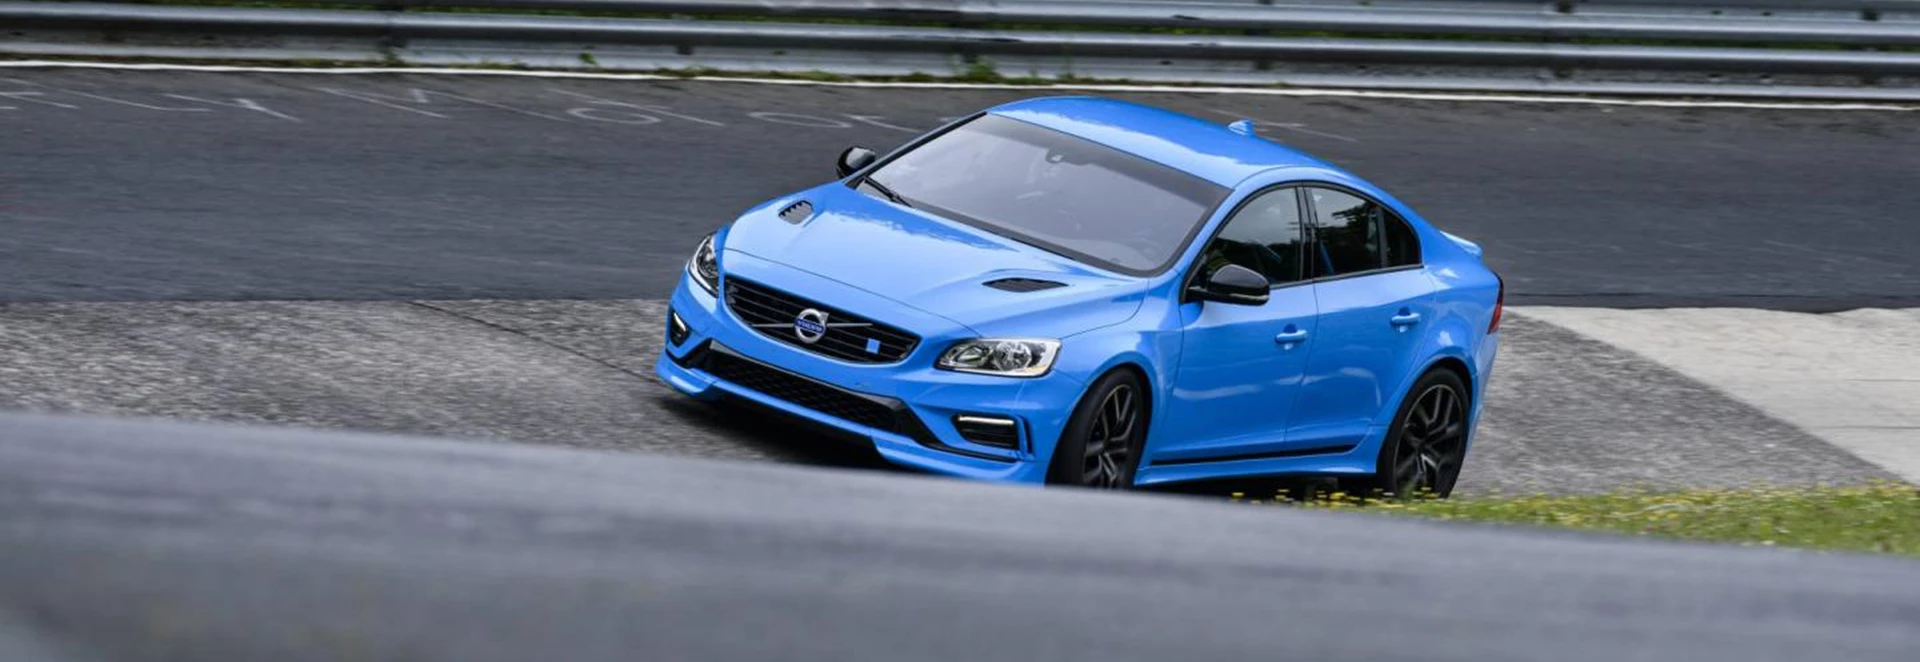 Volvo’s Polestar division to build all-electric sports car